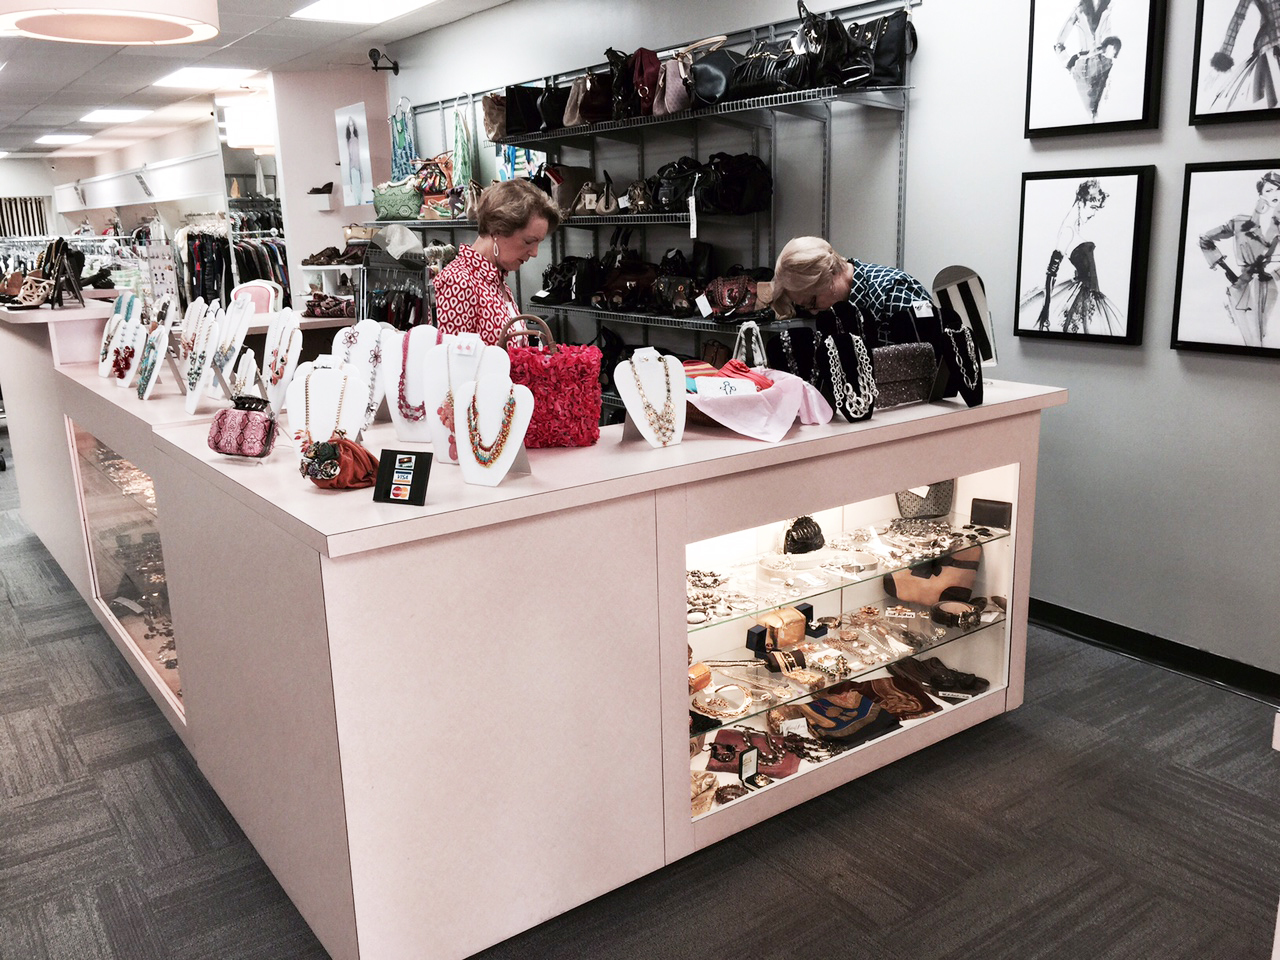 Watson's shop focuses on upscale, current women’s clothing and accessories.